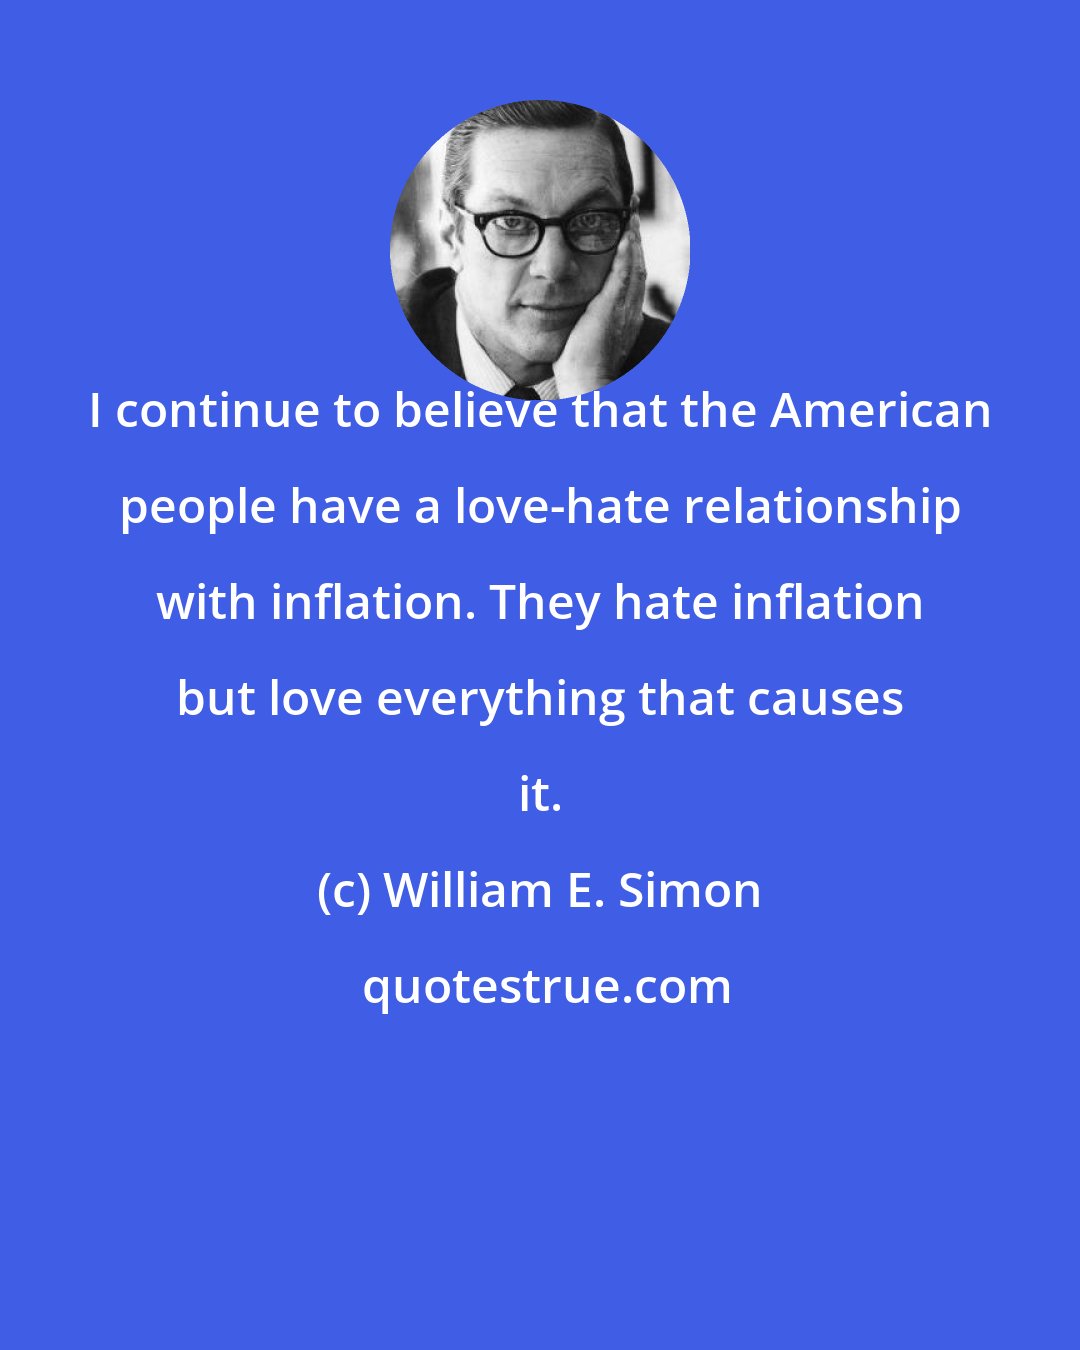 William E. Simon: I continue to believe that the American people have a love-hate relationship with inflation. They hate inflation but love everything that causes it.